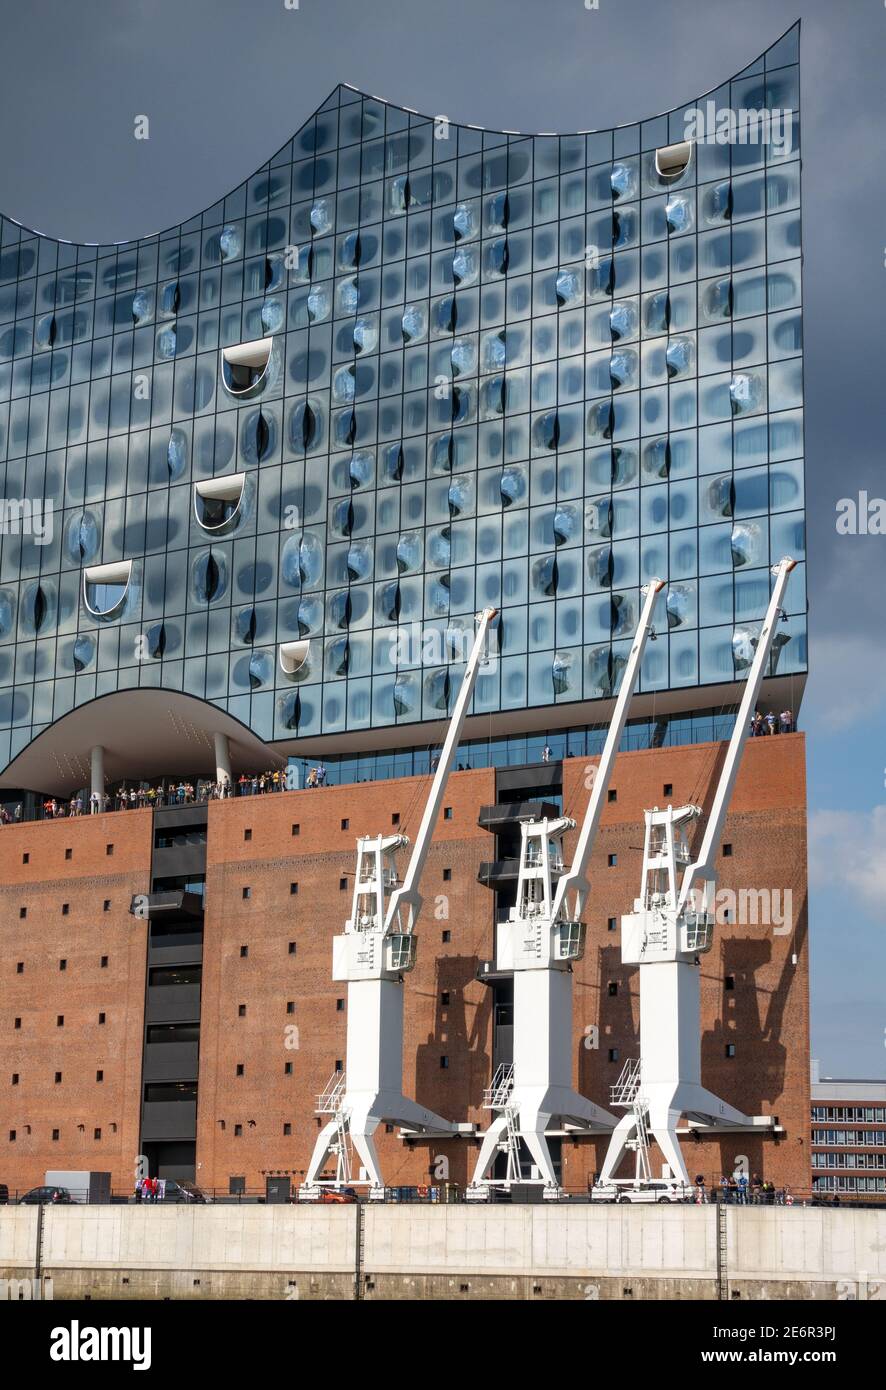 The Elbphilharmonie concert hall on the Elbe River in the HafenCity quarter of Hamburg, Germany Stock Photo